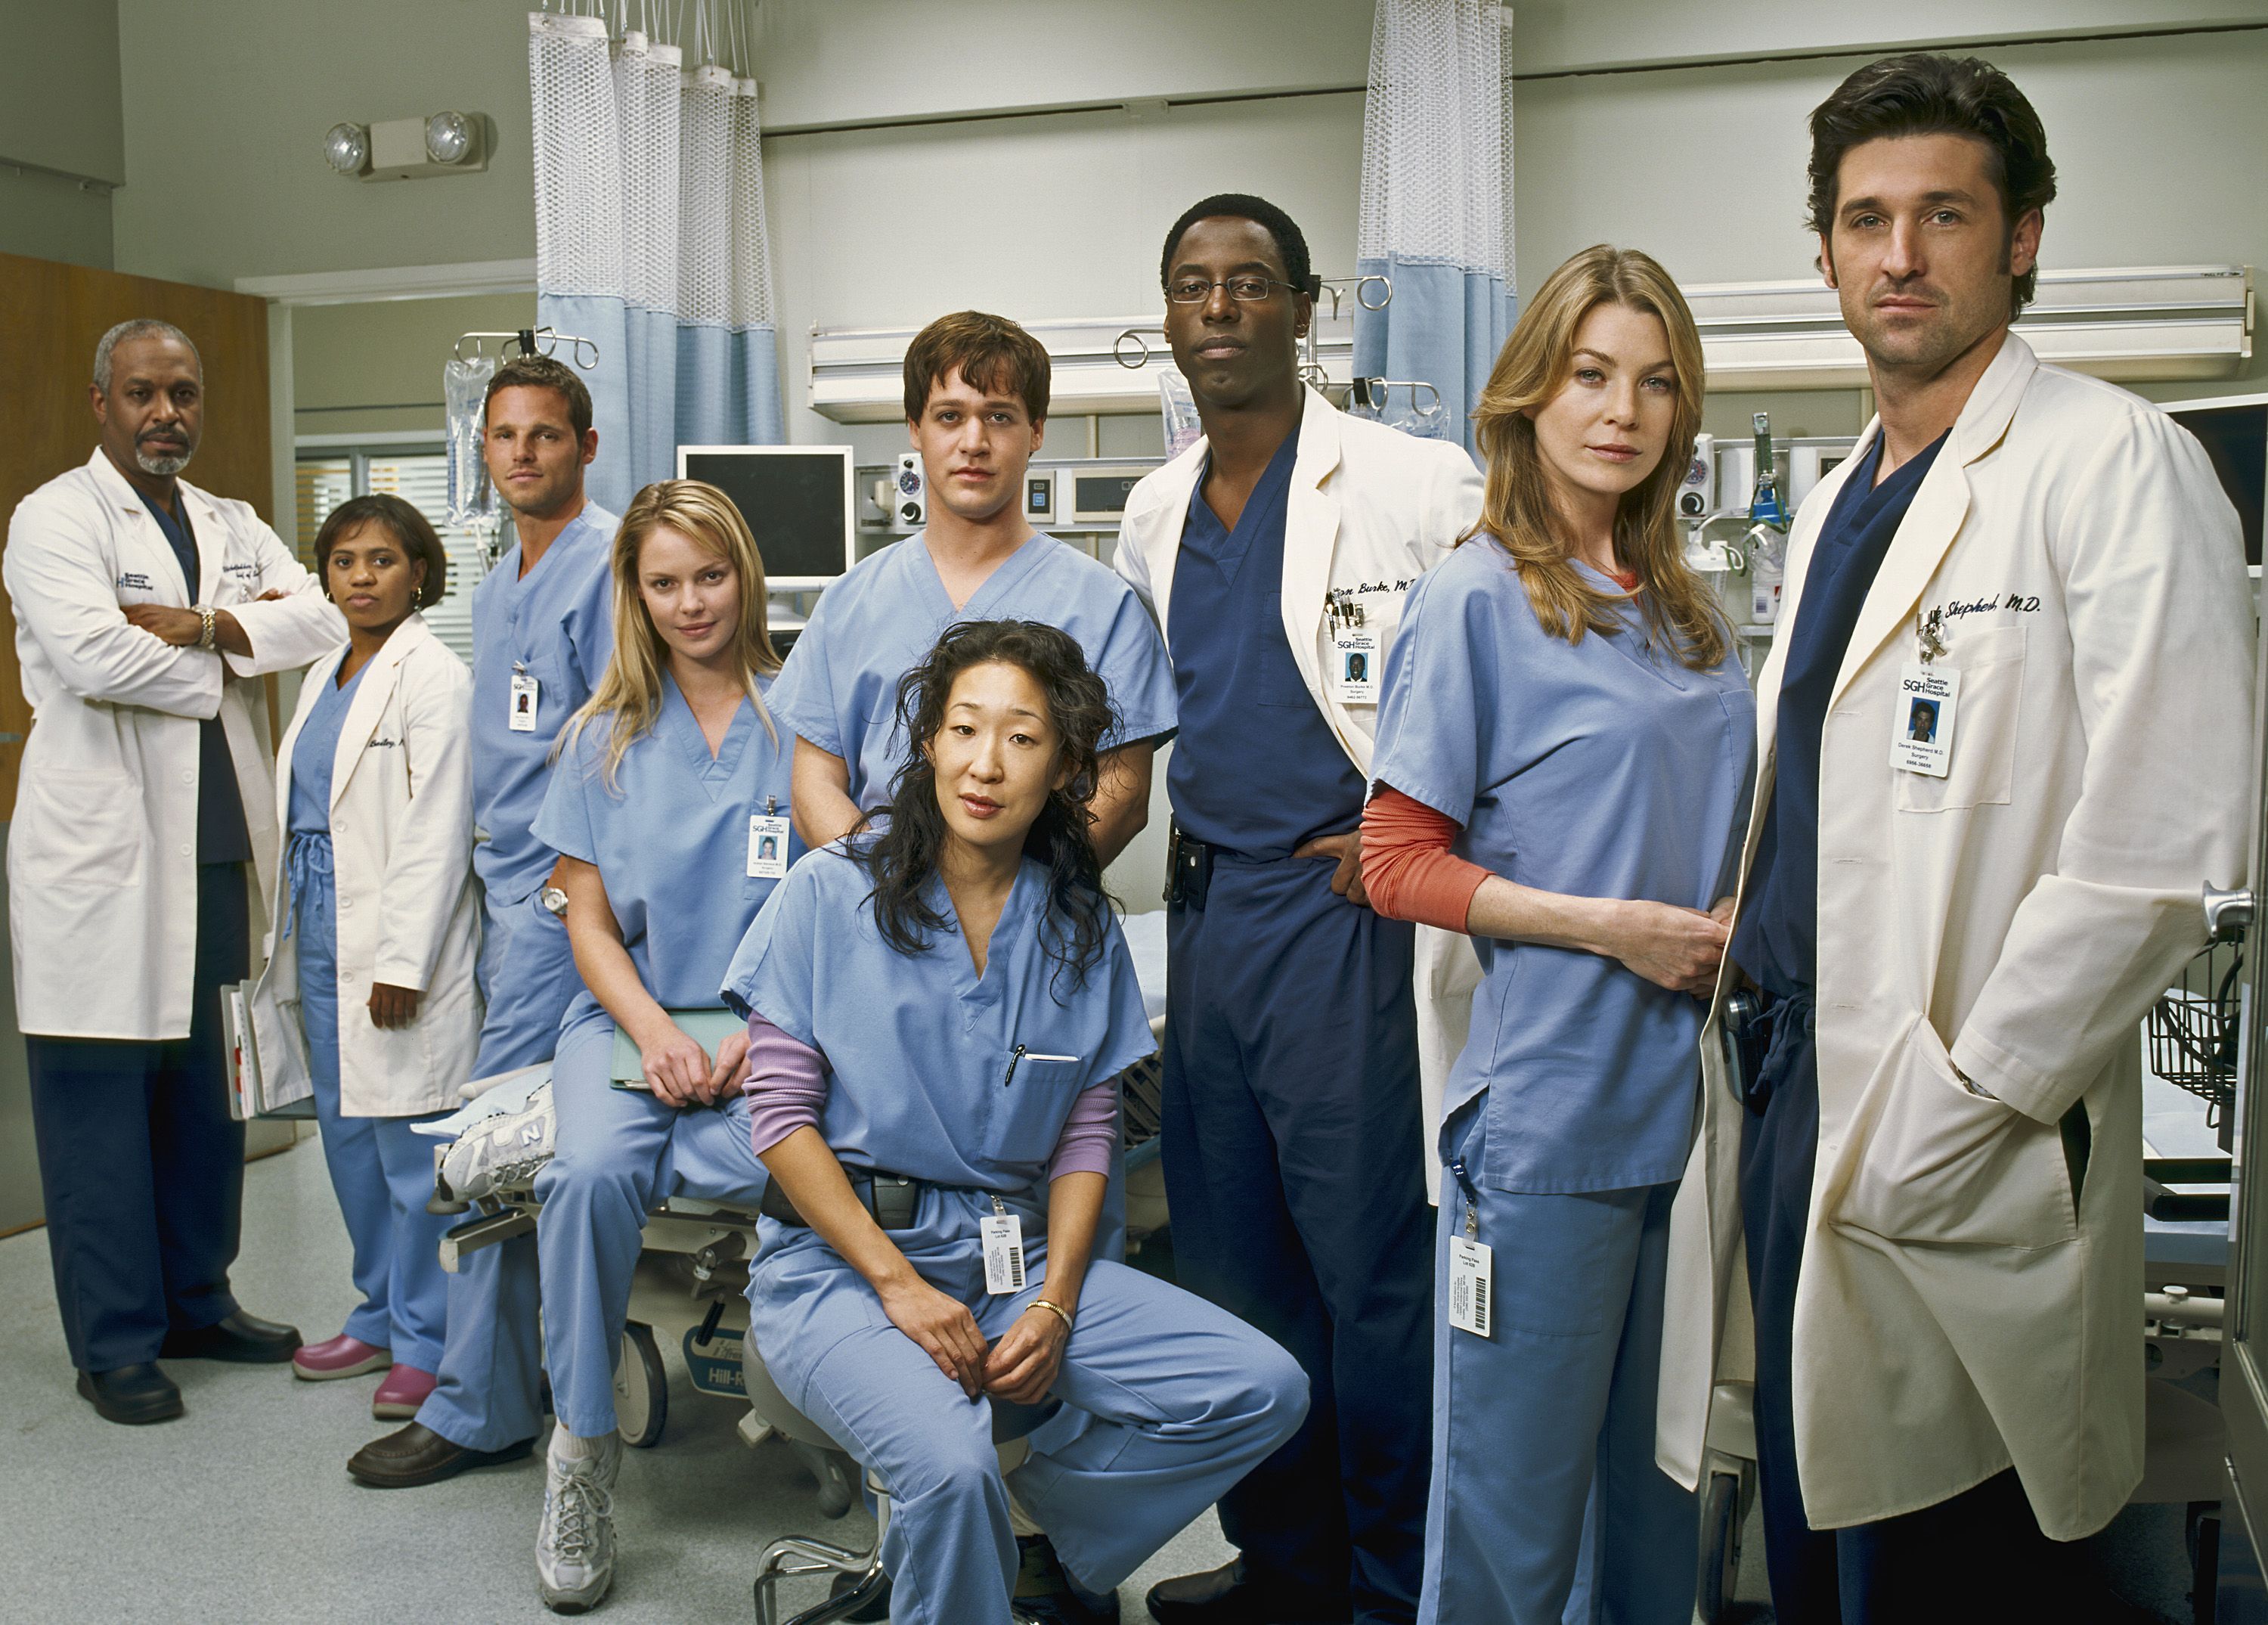 Grey's Anatomy Cast From Season 1 to Now, How They've Changed